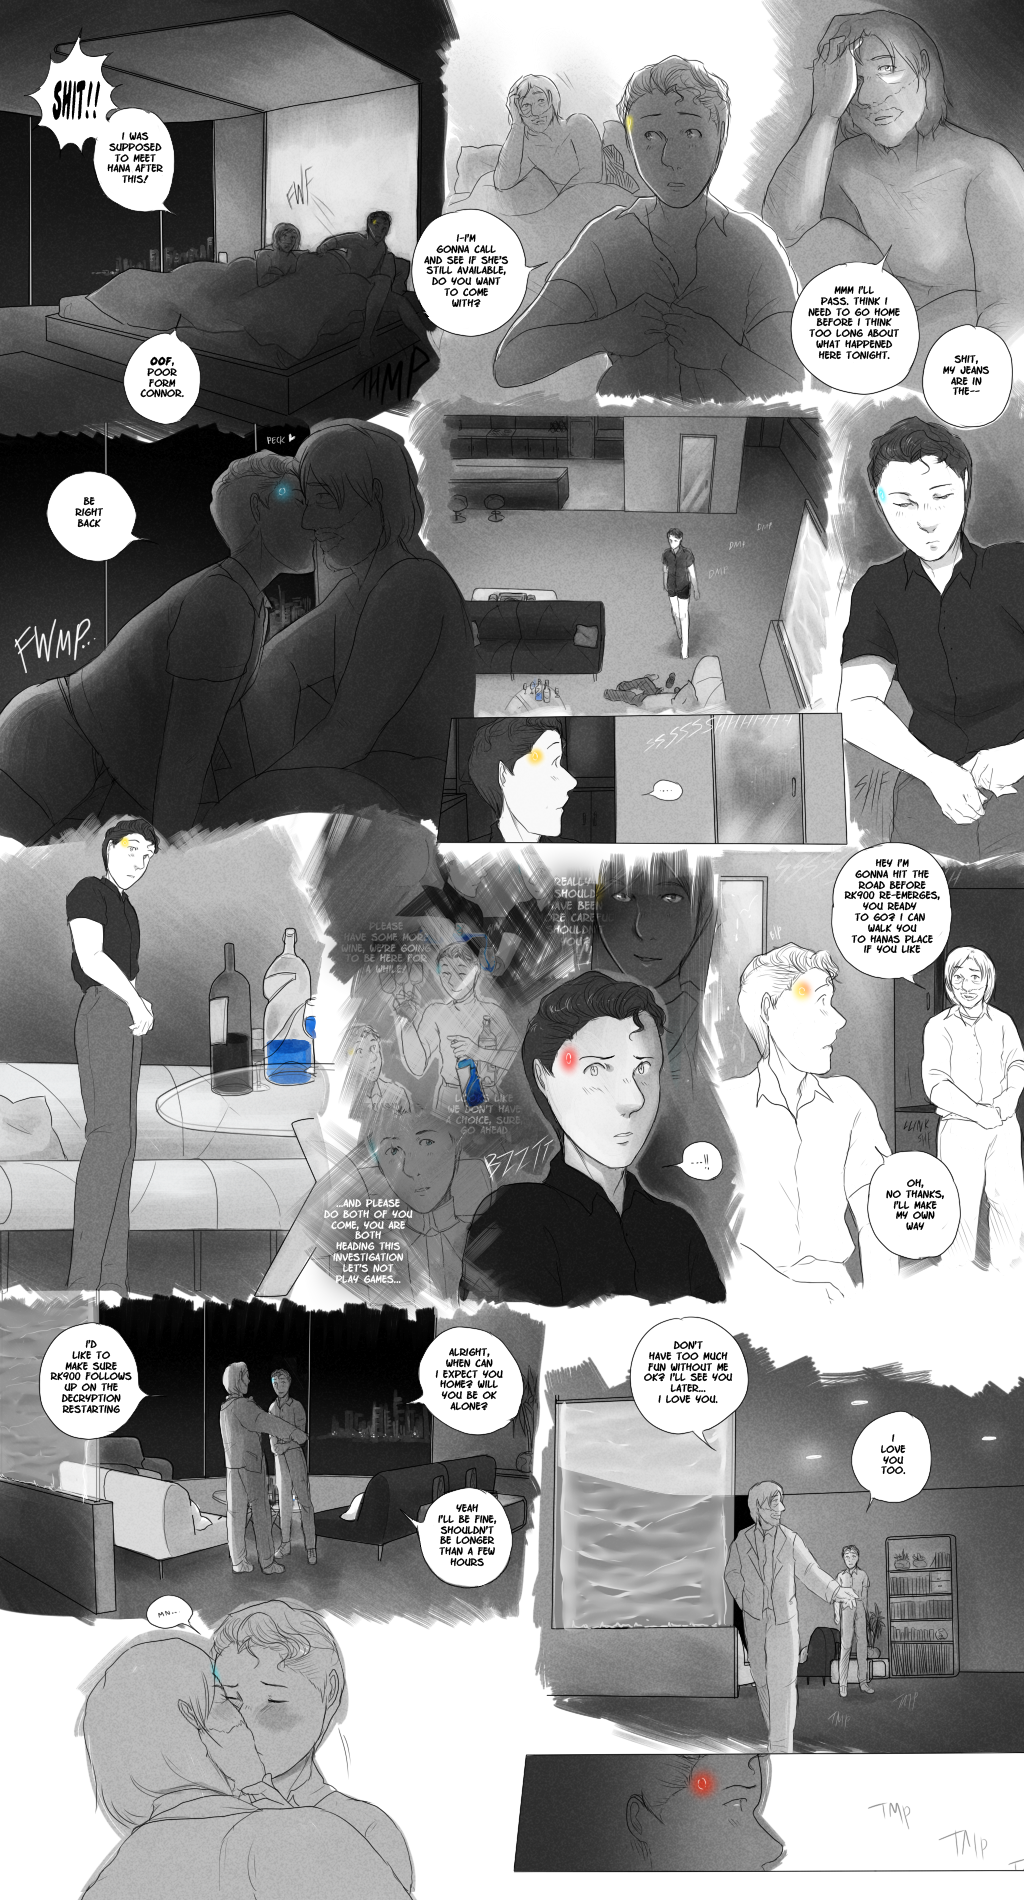 Post 4548746 Comic Connor Detroit Become Human Hank Anderson Himinotebook